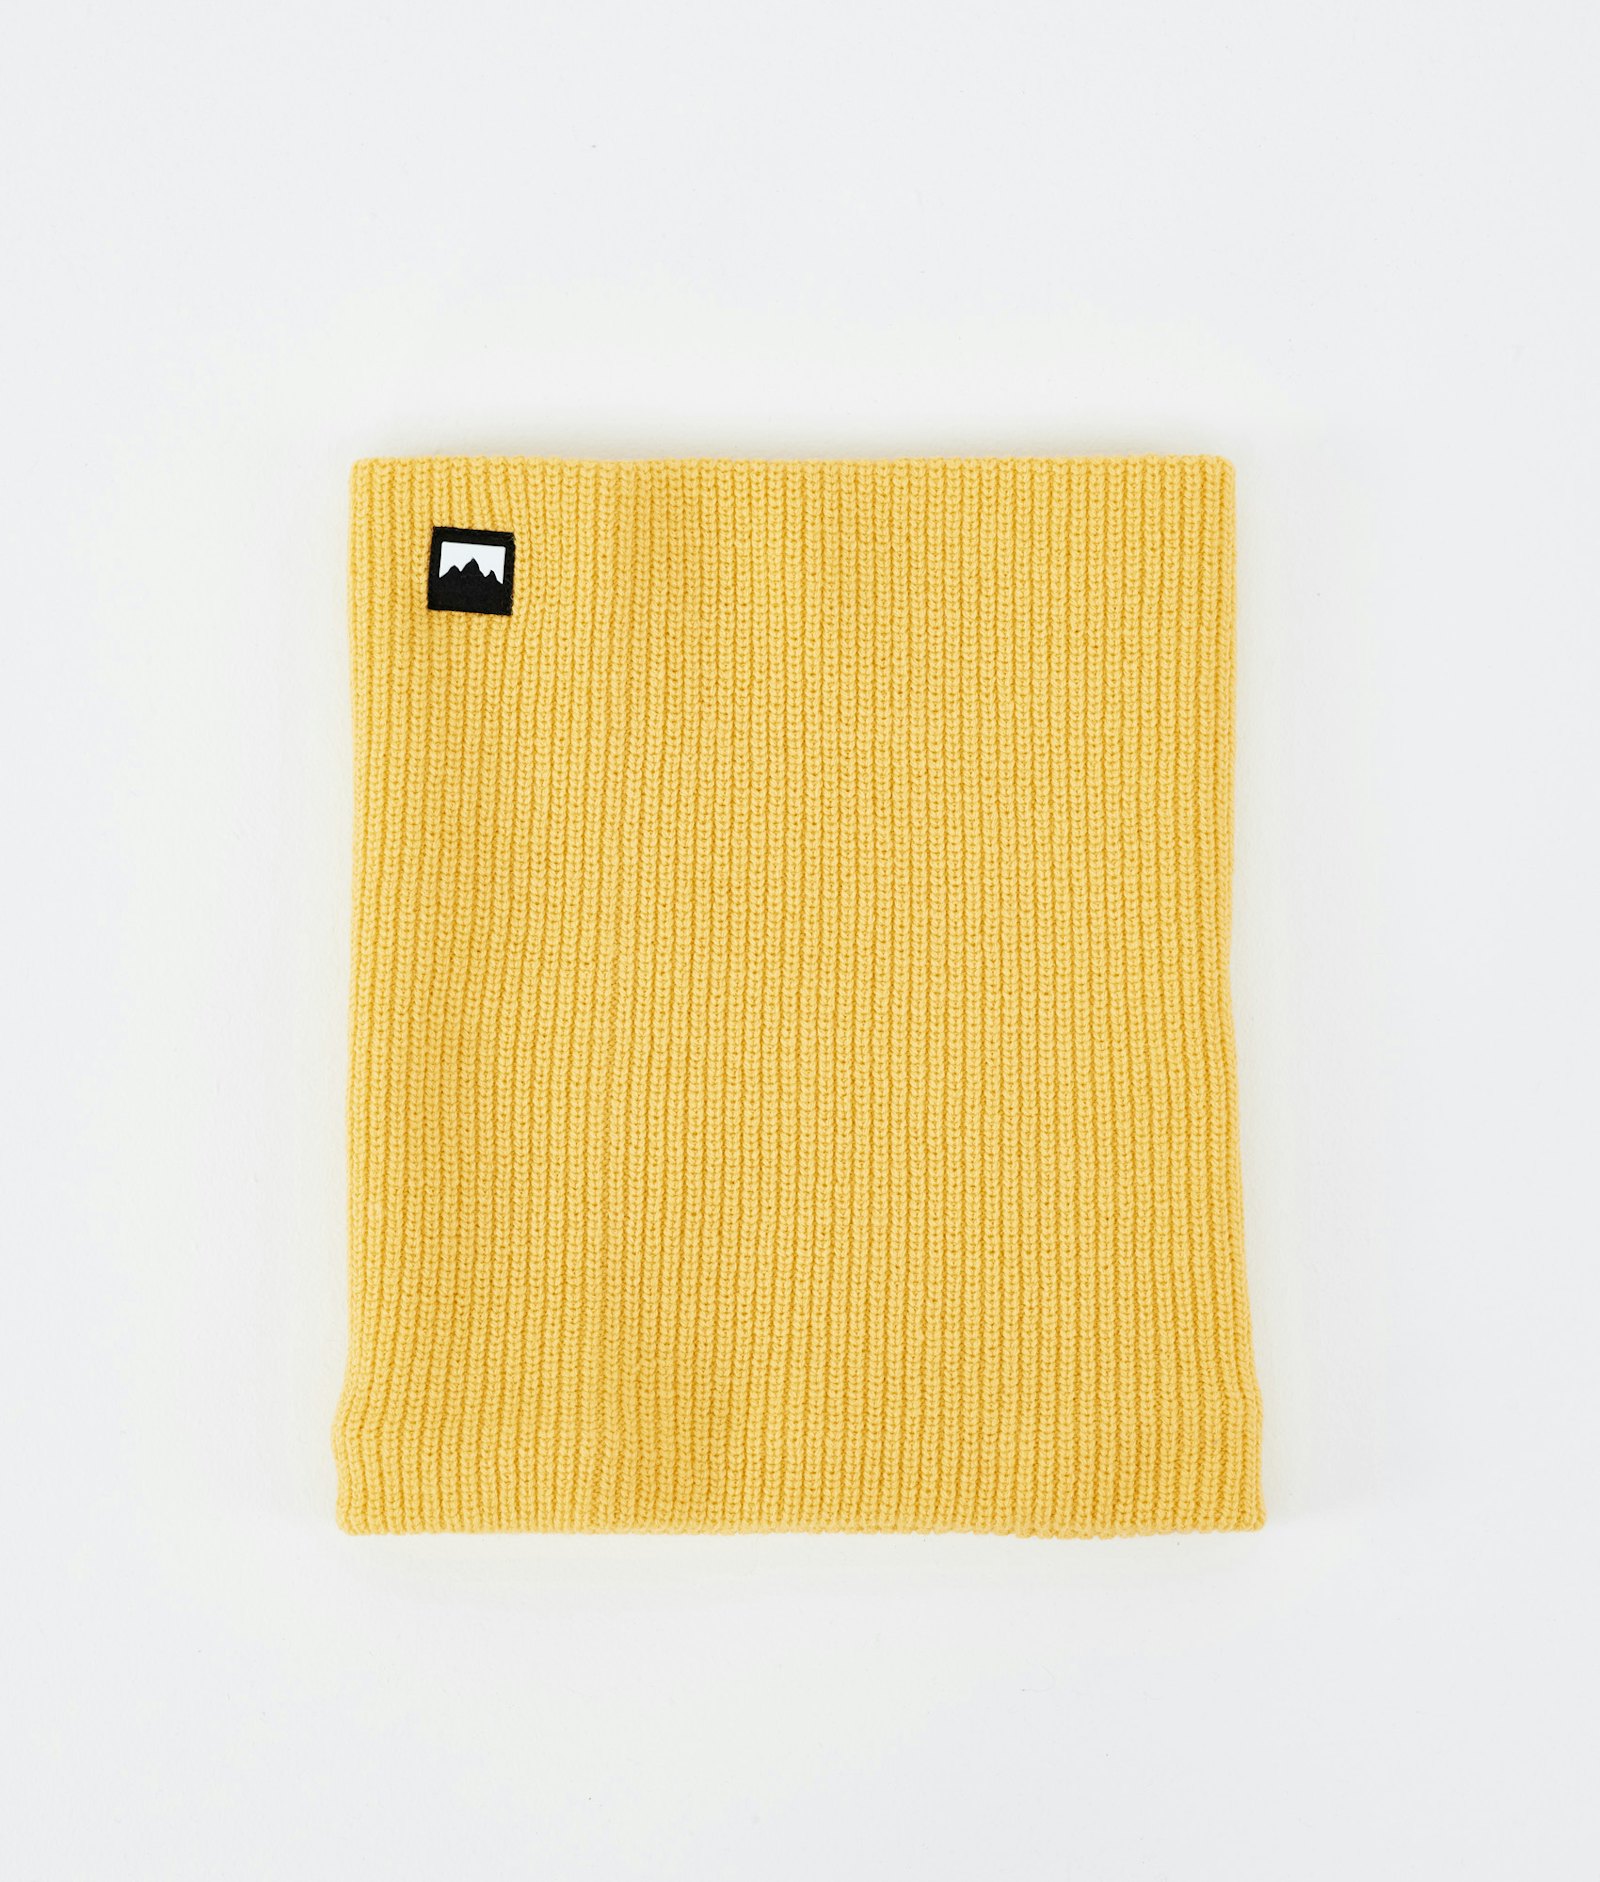 Montec Classic Knitted Facemask Yellow, Image 1 of 3